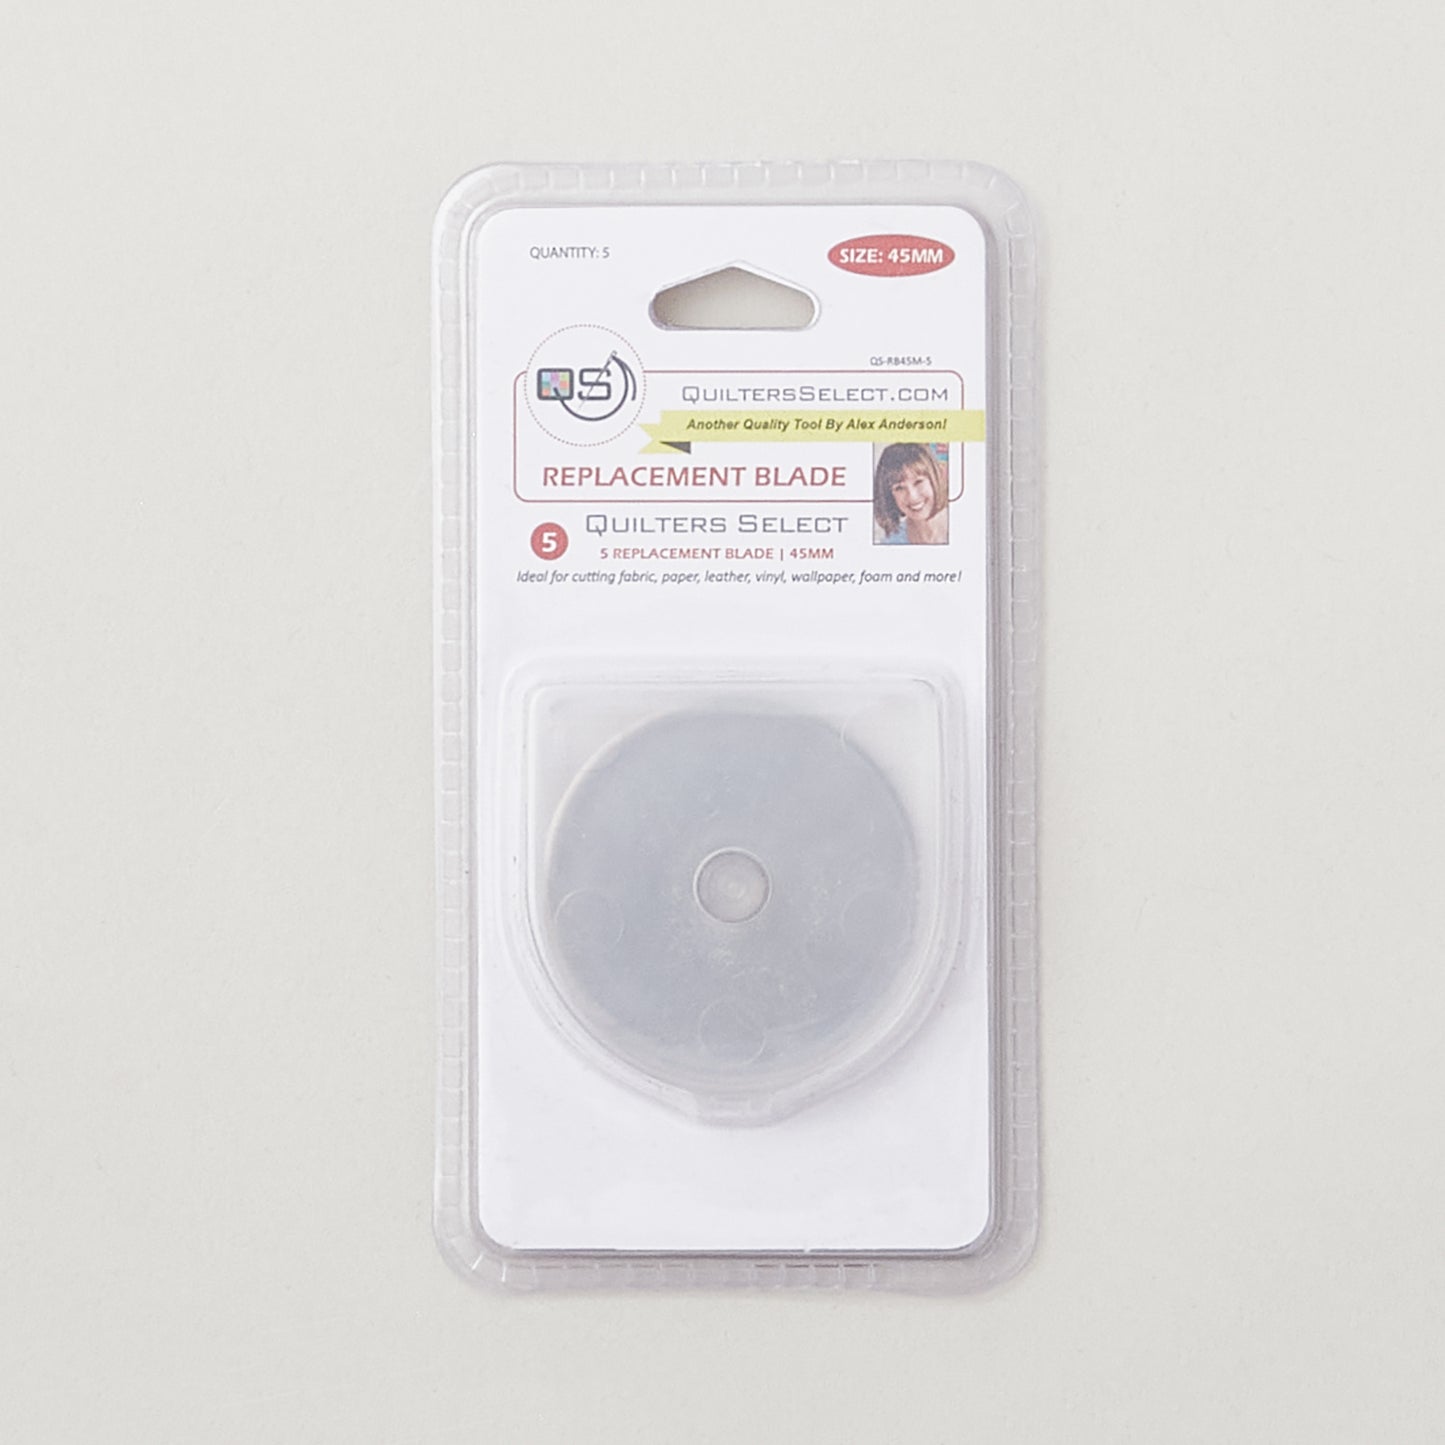 Quilters Select 45mm Rotary Blade Replacements - 5 pack Alternative View #3